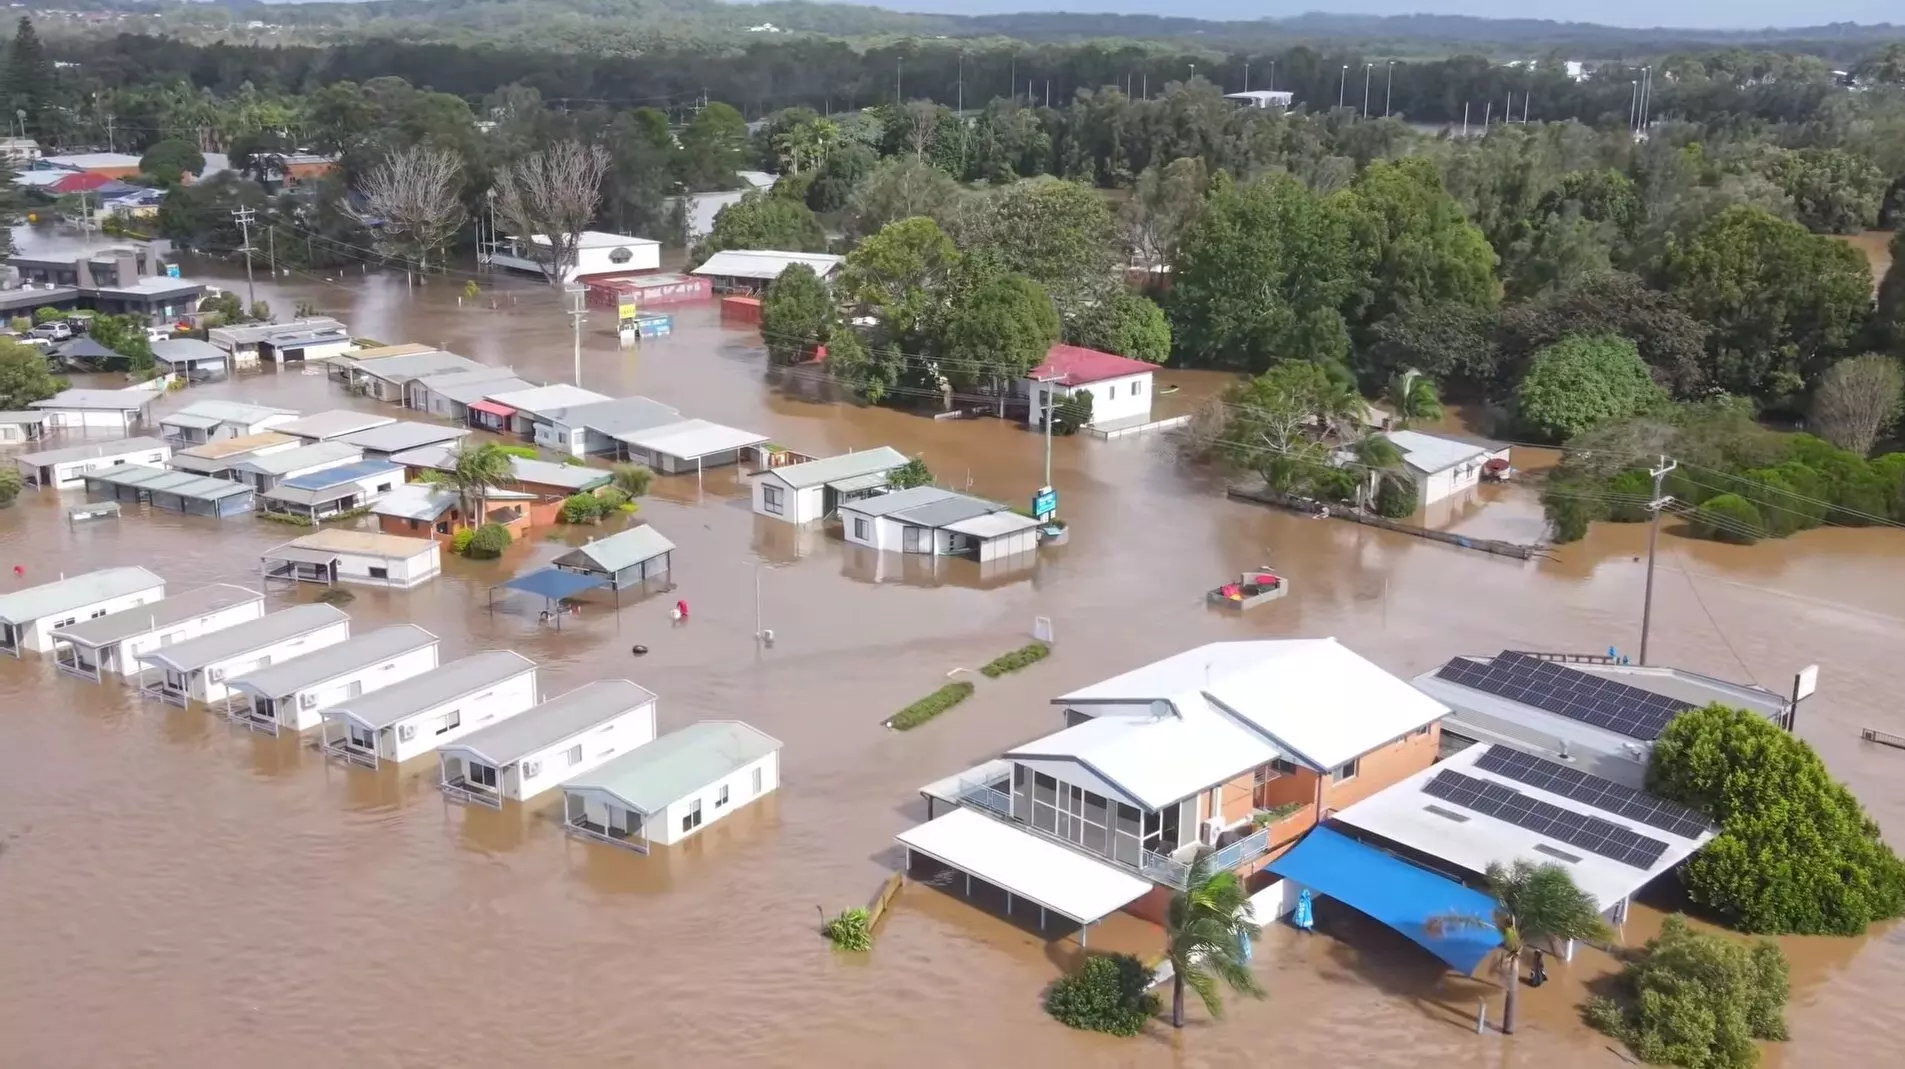 Thousands still evacuated due to downpour, flood in Australian state